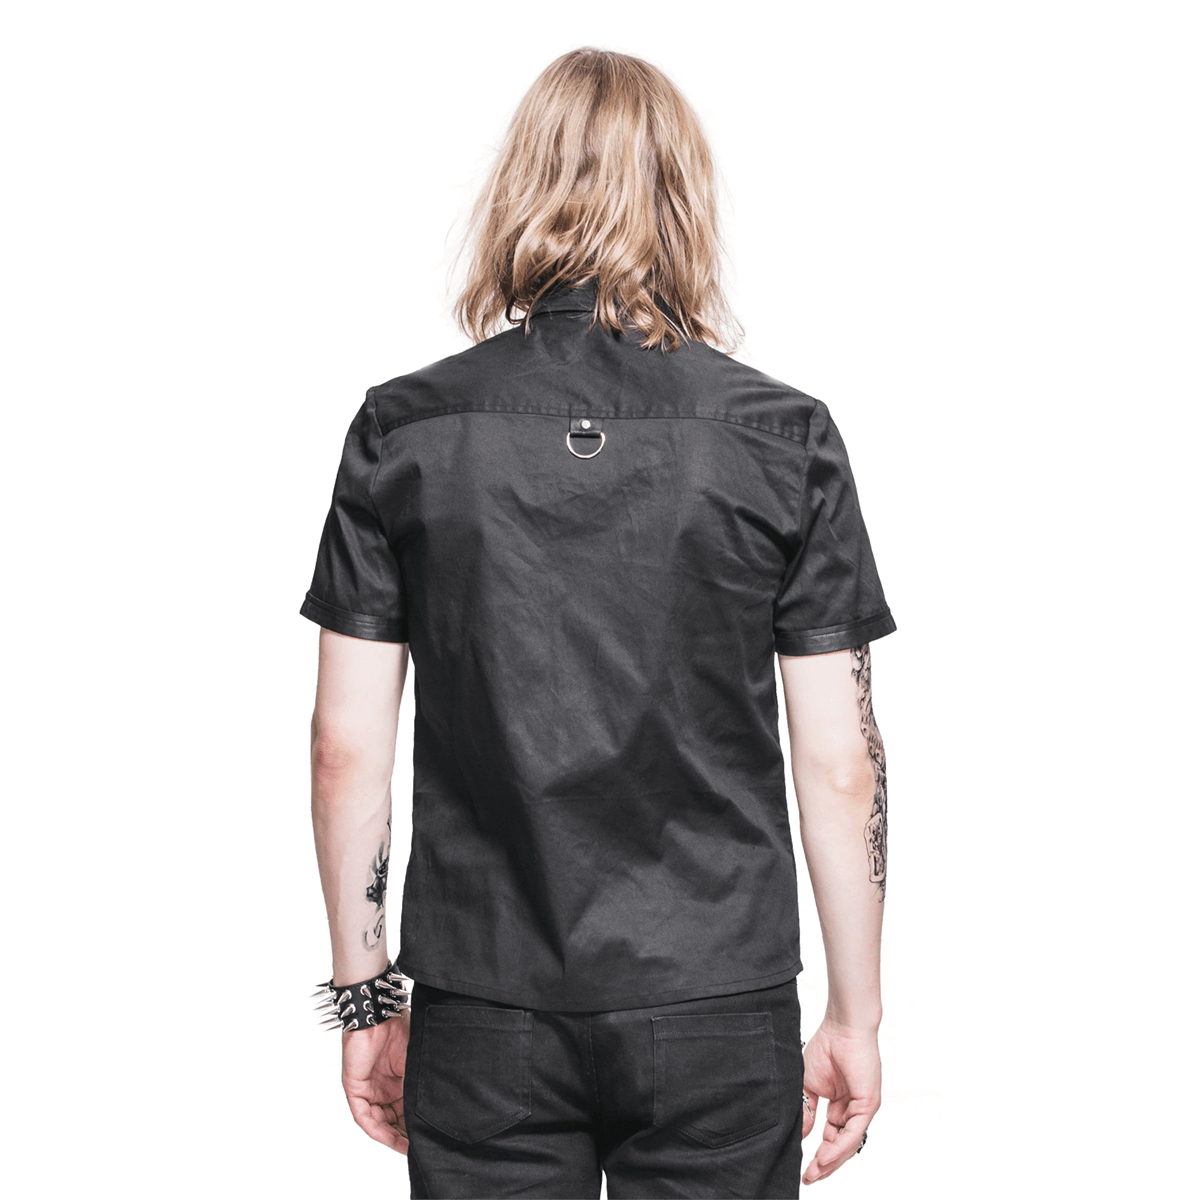 Black Gothic Punk Short Sleeves Shirt for Men / Male Shirts With Shoulder Thin Imitation Leather - HARD'N'HEAVY